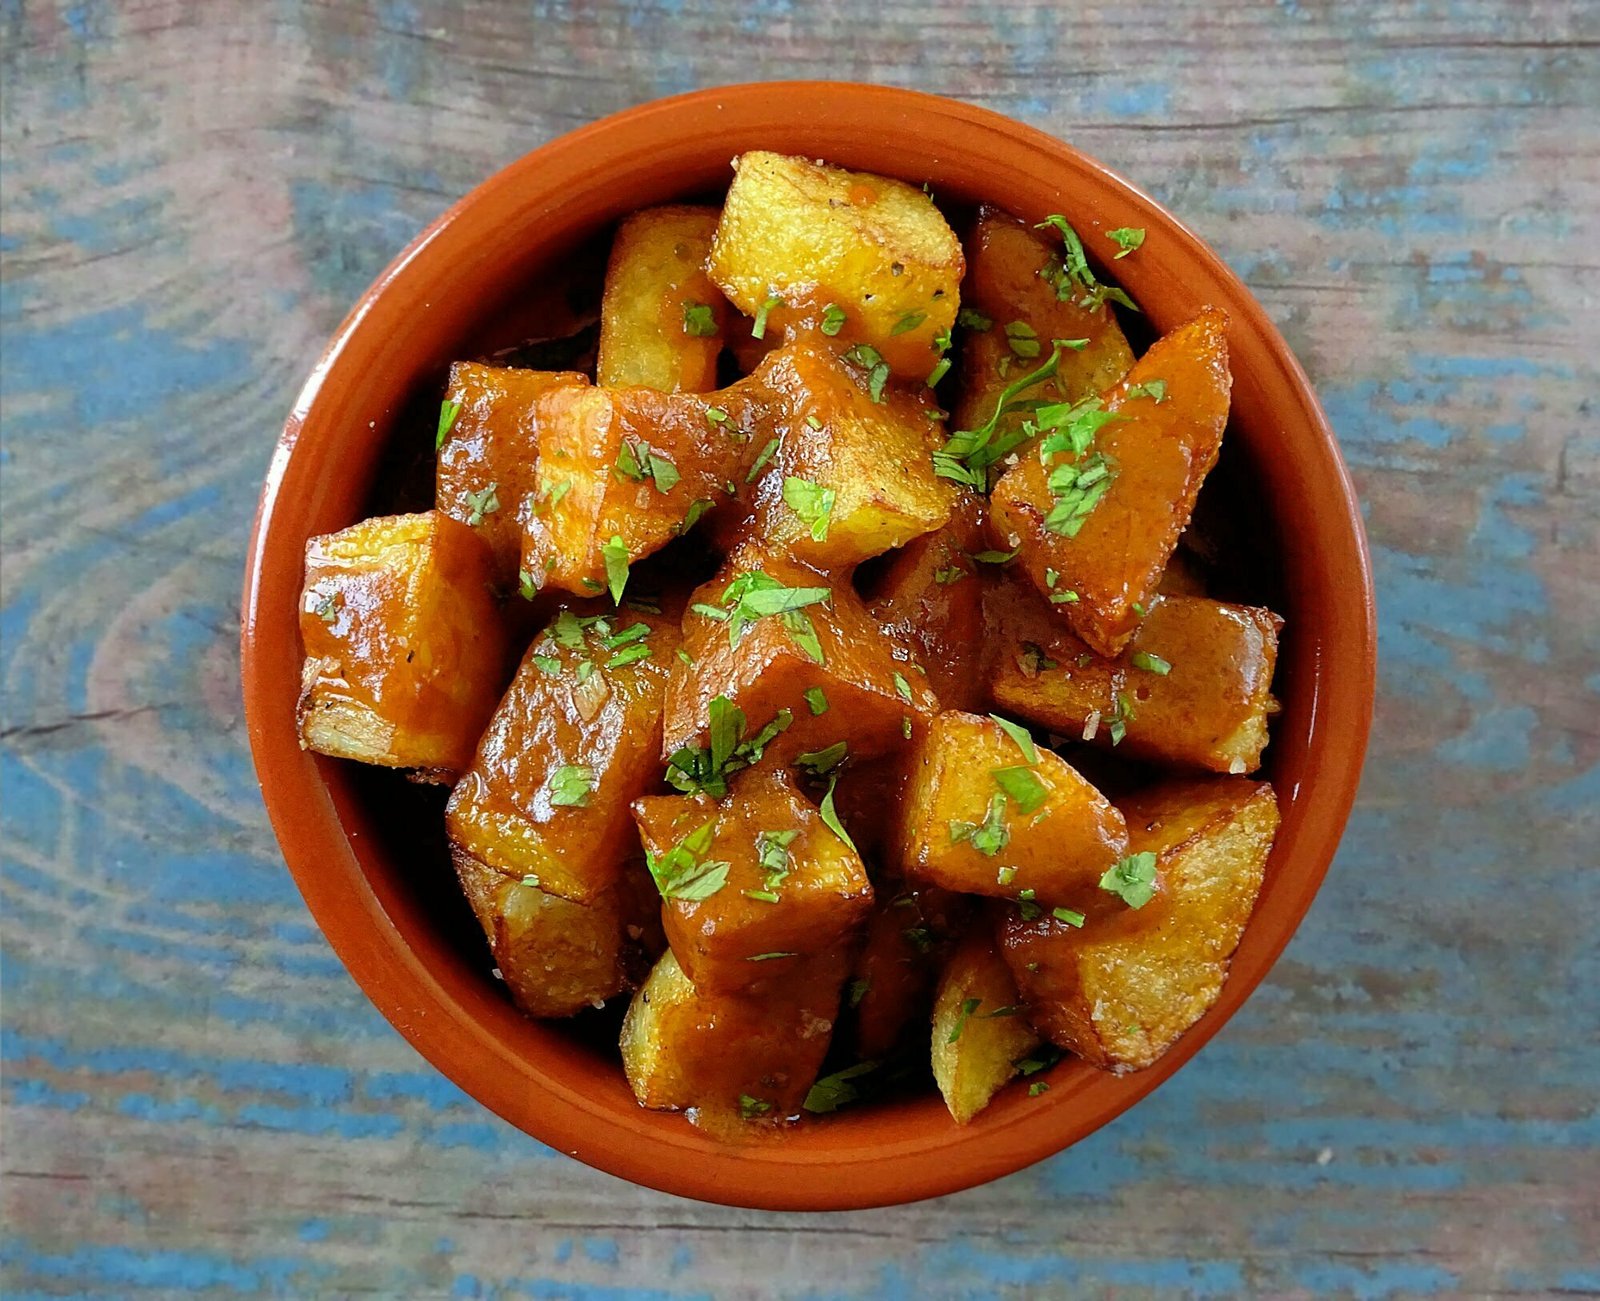 an earthenware dish sits on a blue wooden table and is filled with golden friend potato pieces smothered with Spanish bravas sauce